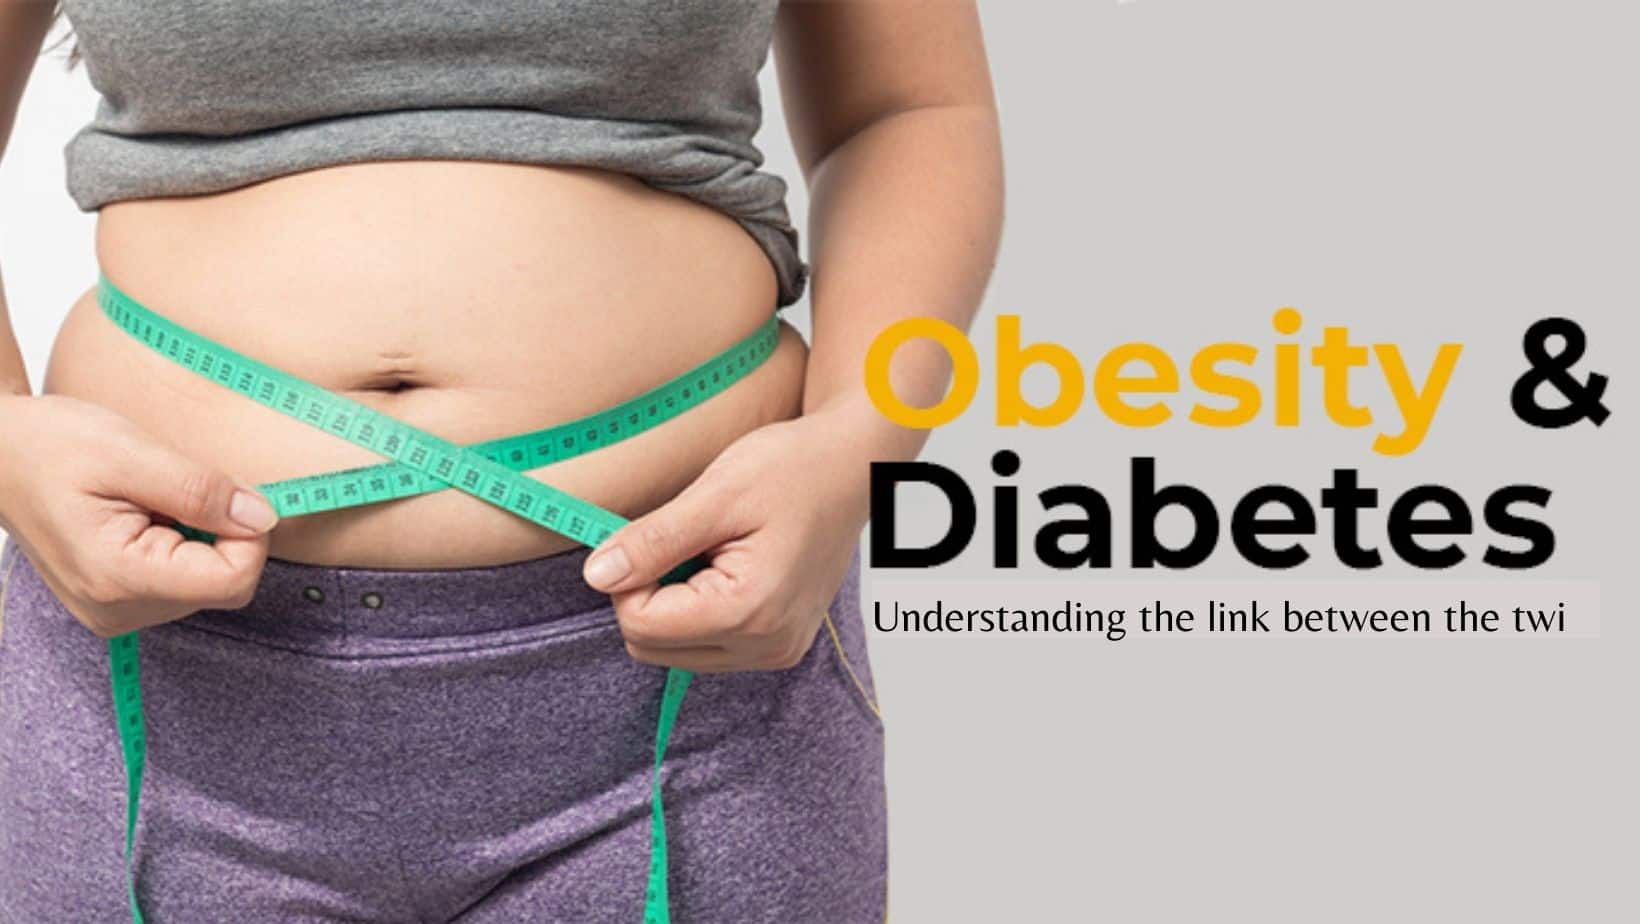 Type 2 Diabetes And Obesity Why Controlling Your Weight Is Important When You Have Diabetes